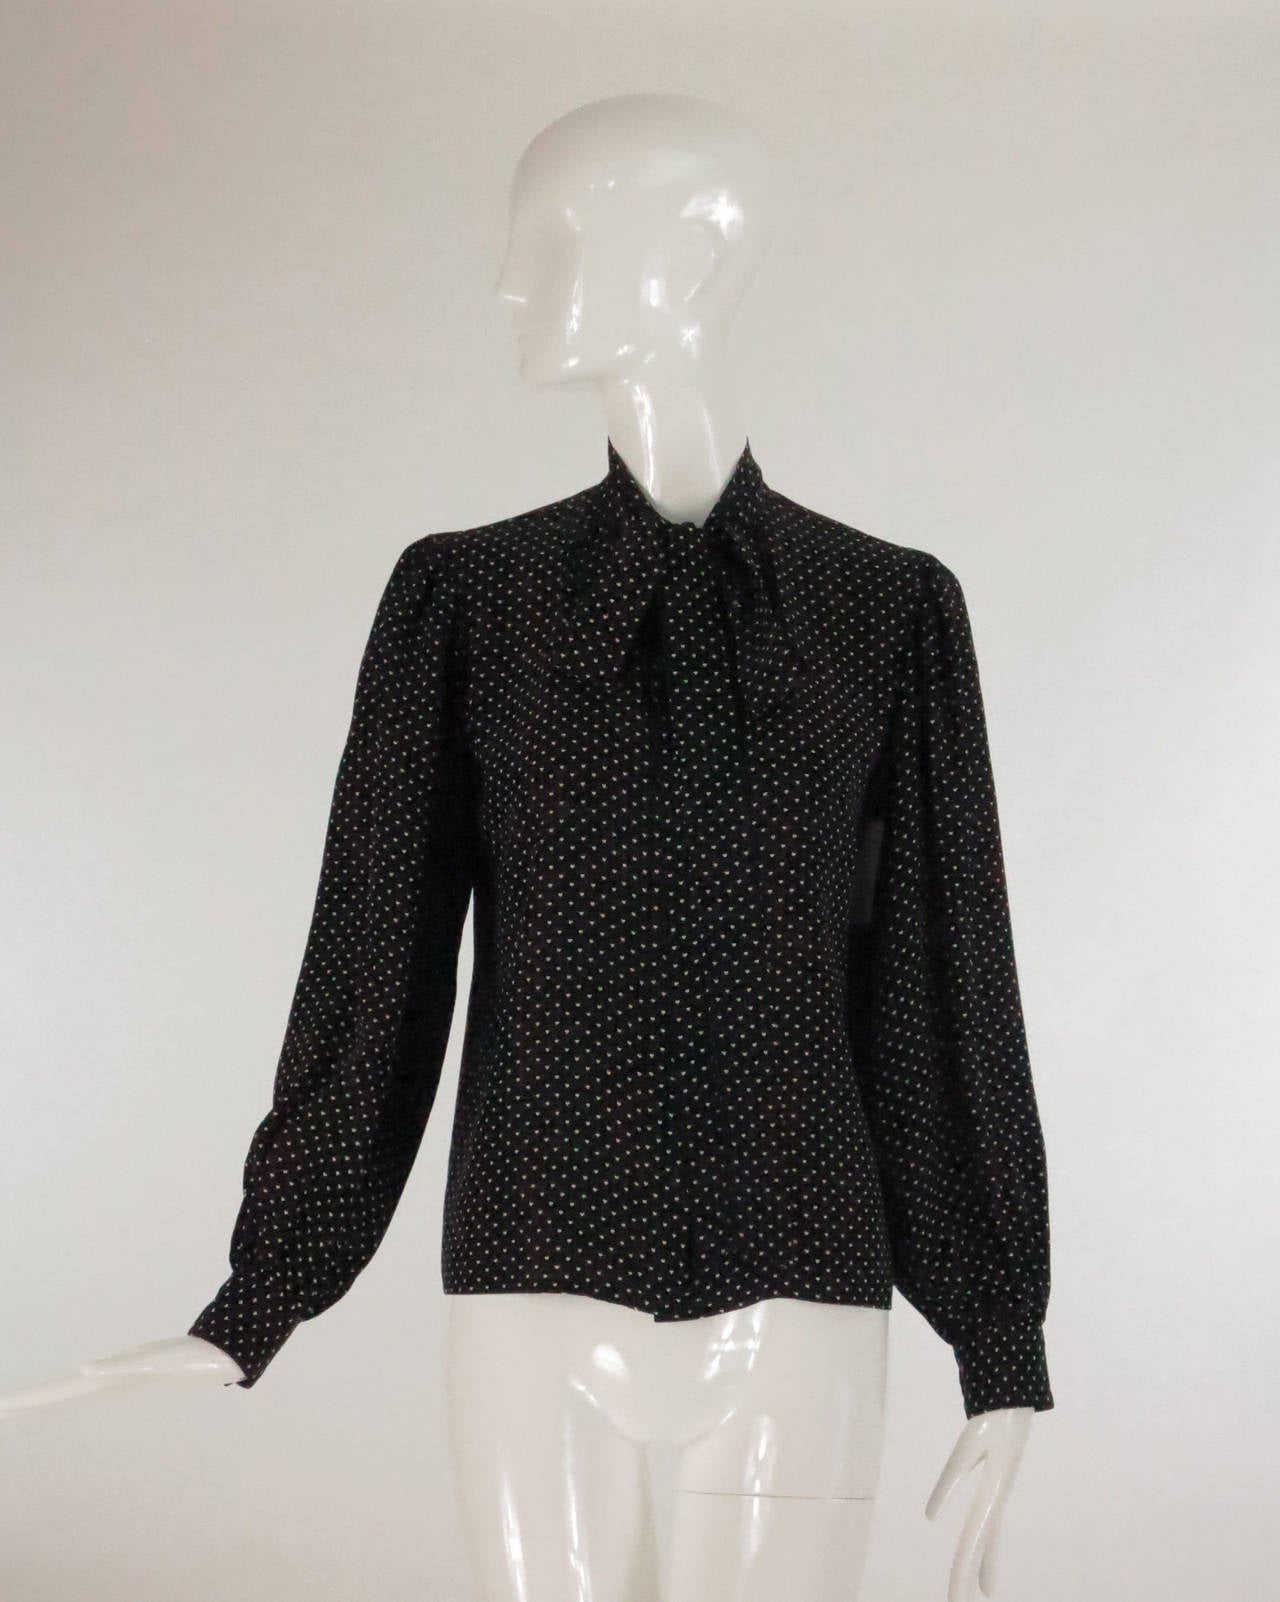 Yves St Laurent black and white silk tiny heart print blouse…Long sleeve button cuff blouse, closes with buttons at the front under placket and a bow tie at the neckline…Unlined…Marked size 36…Fits 4-6…

Please check the measurements provided